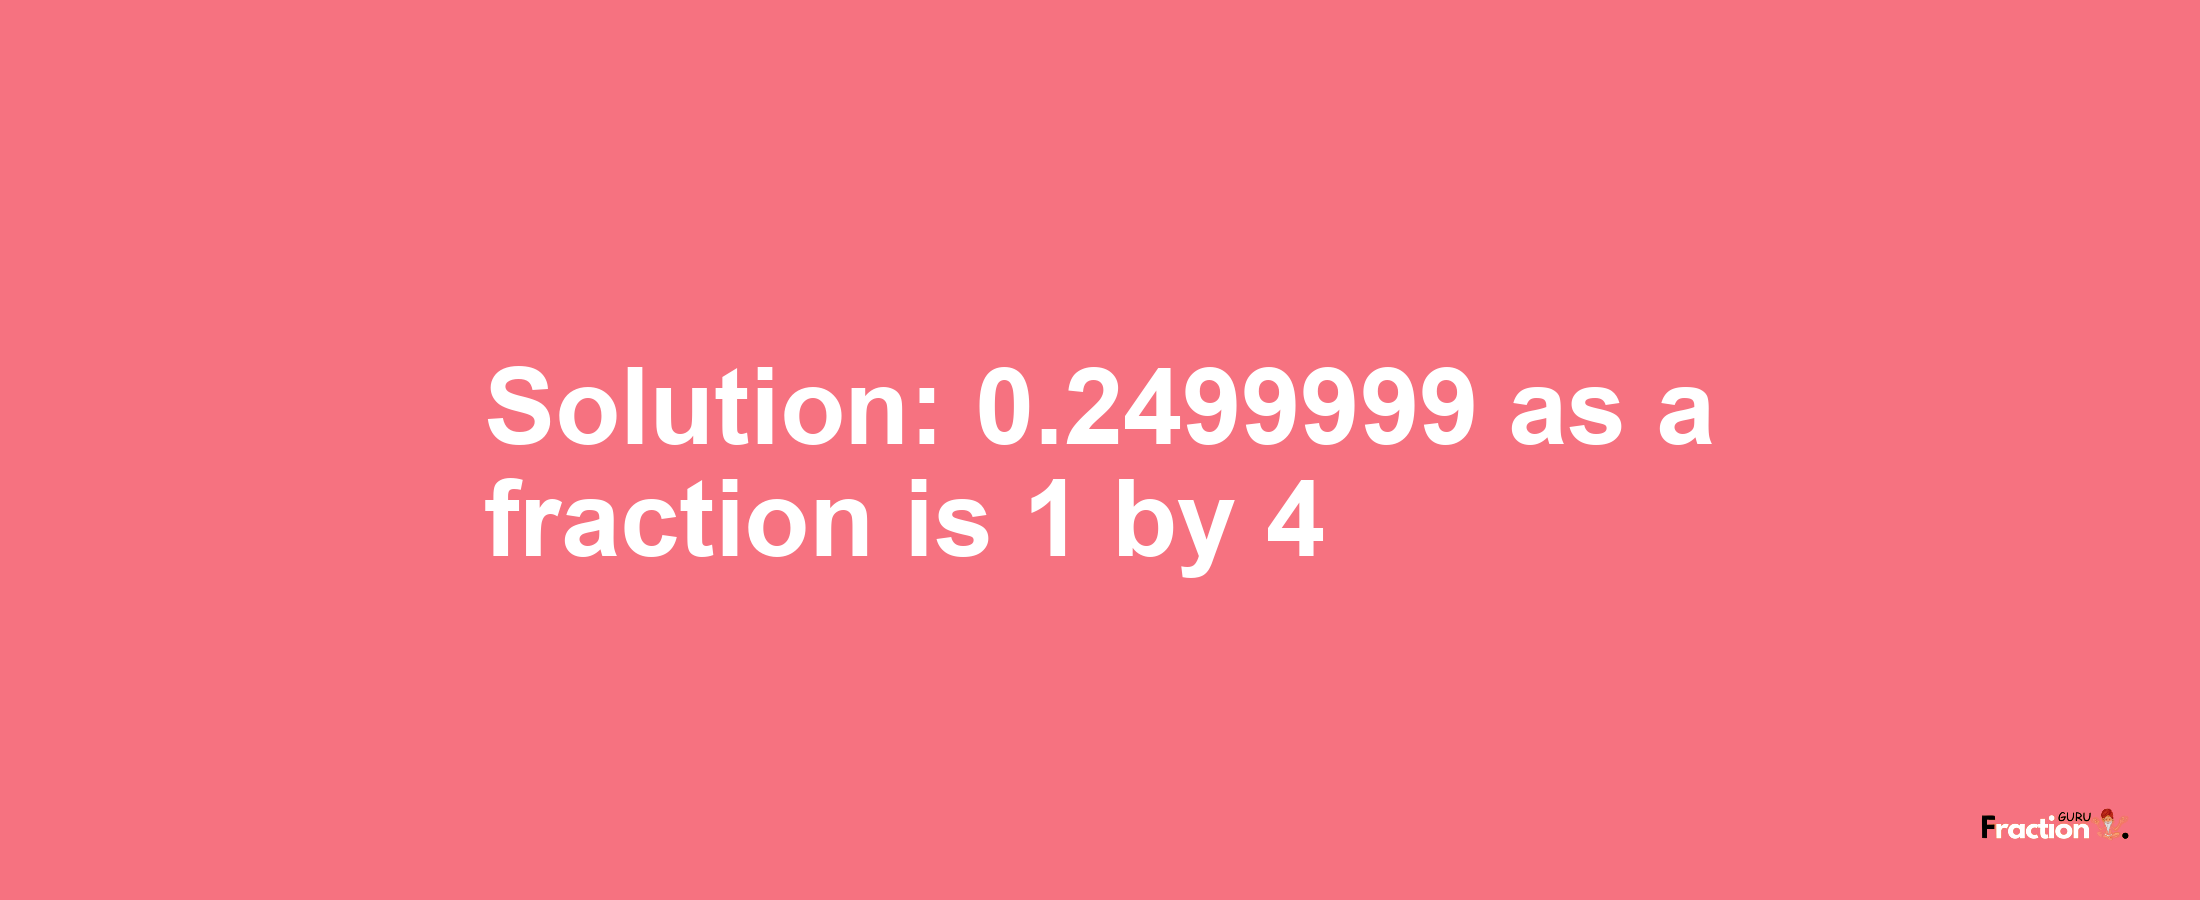 Solution:0.2499999 as a fraction is 1/4